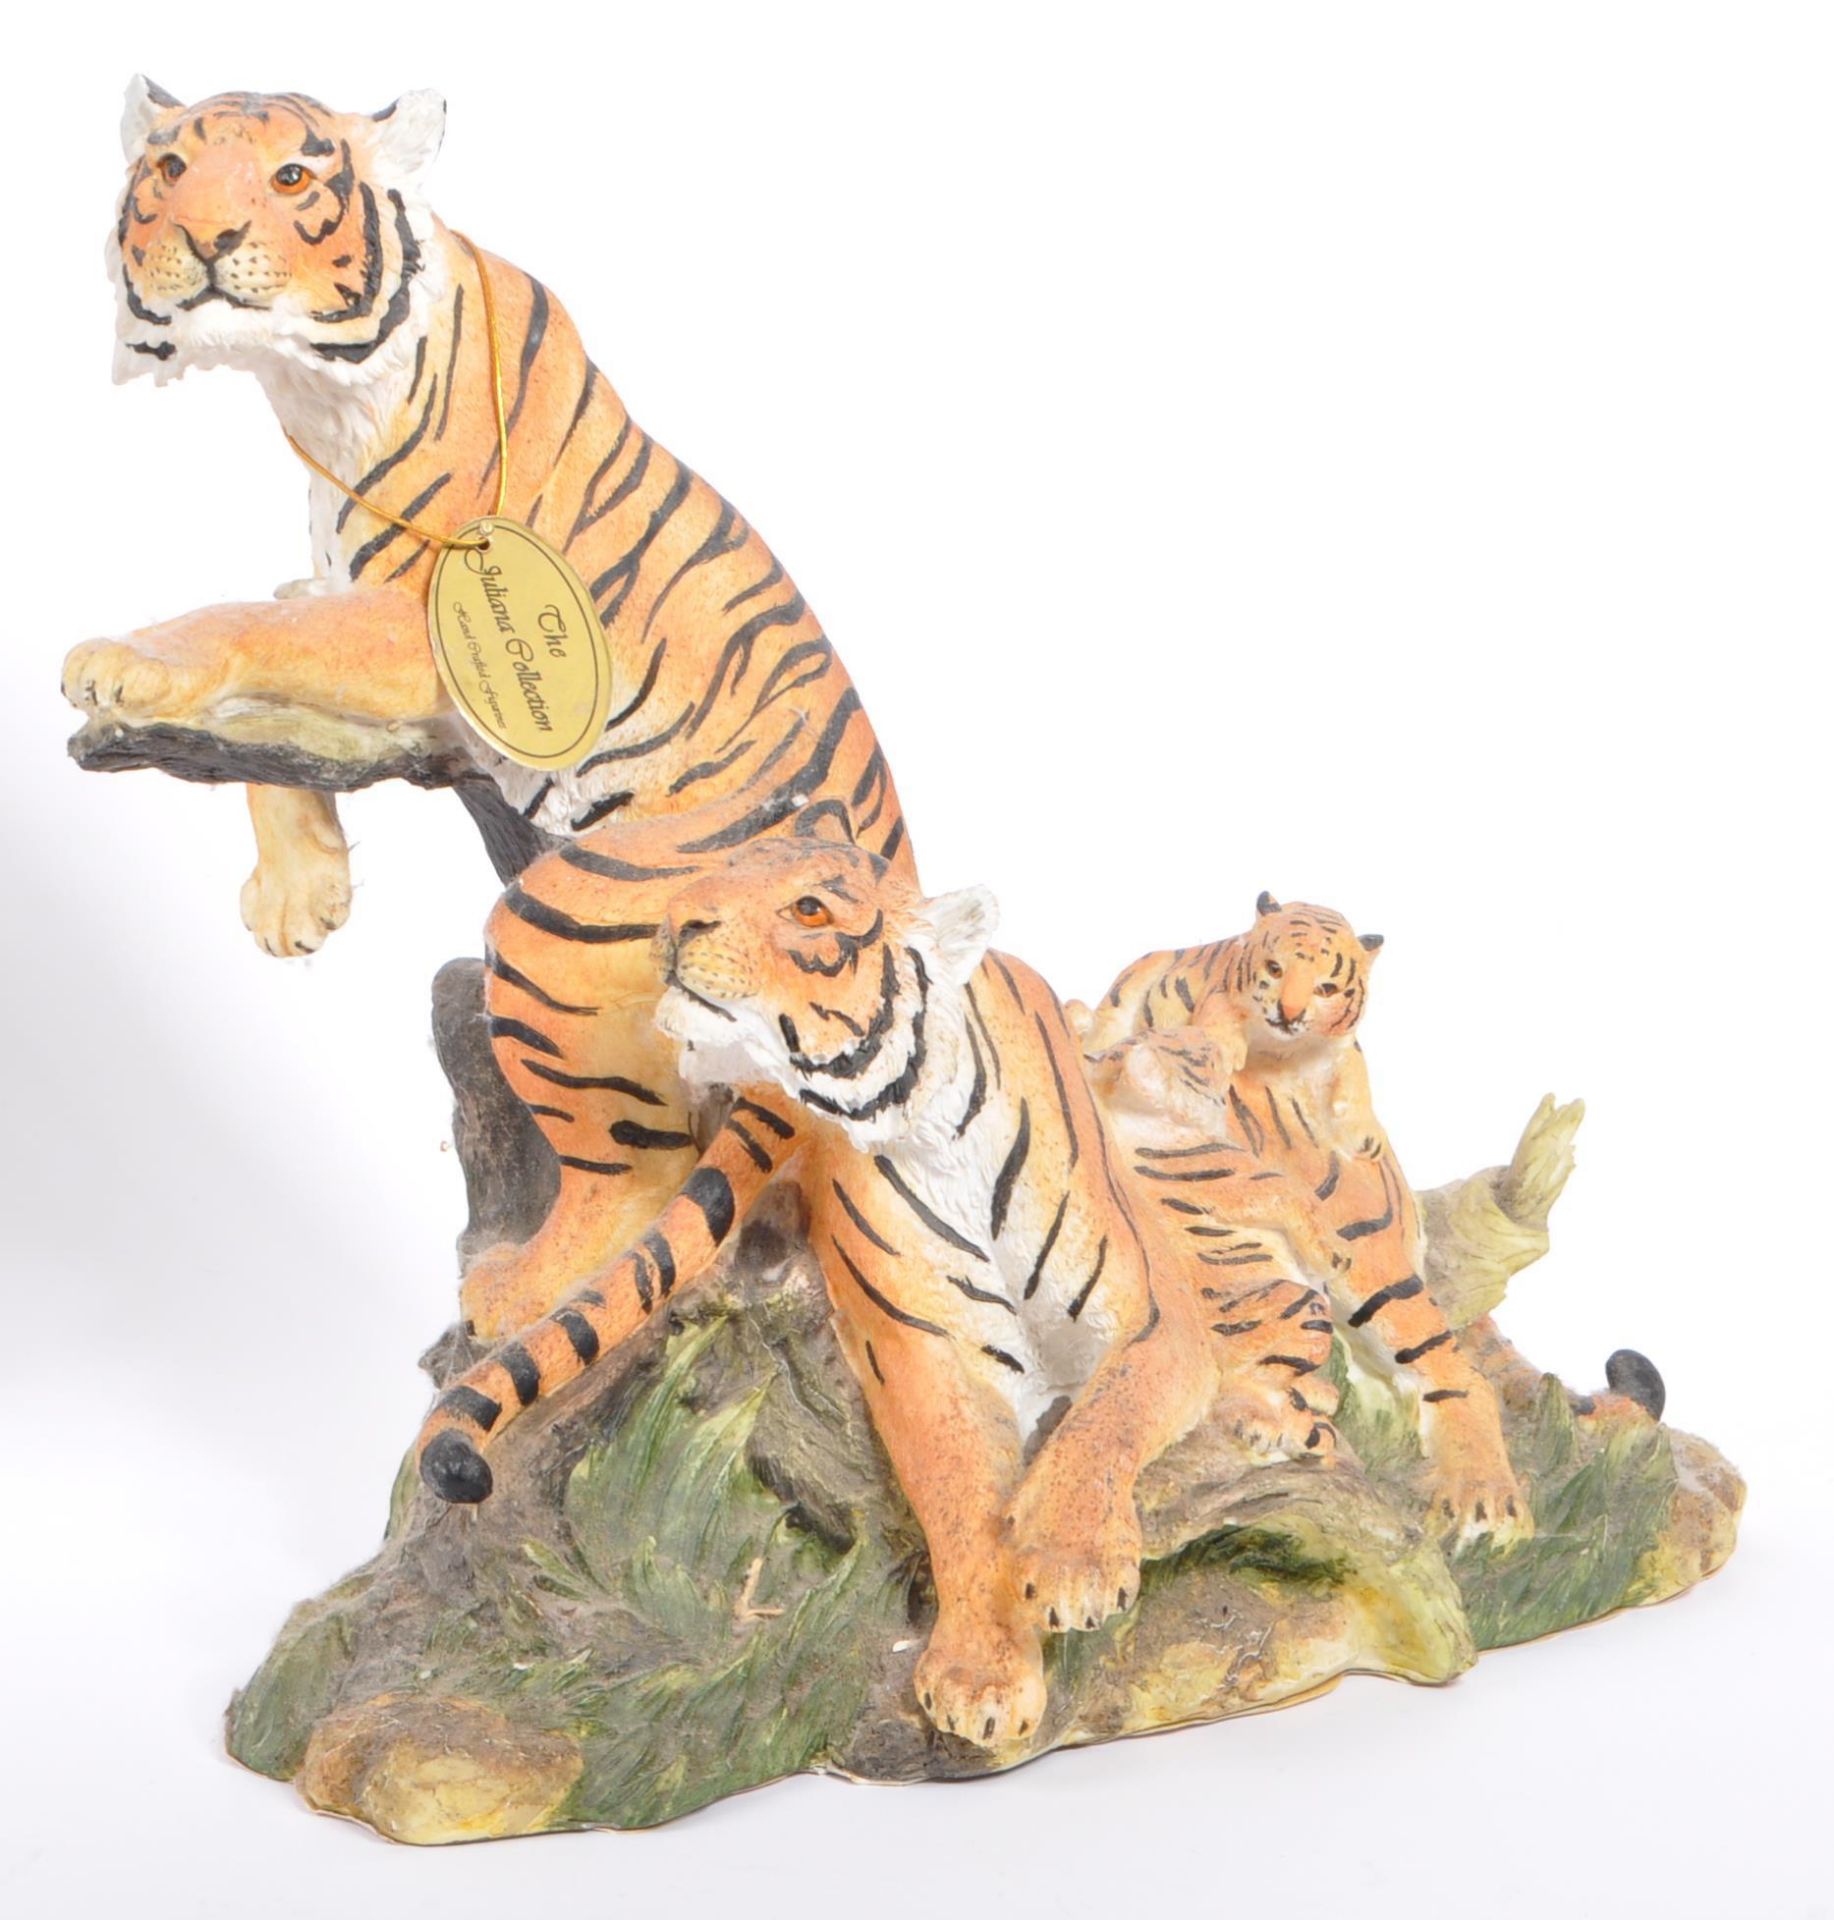 COLLECTION OF OF RESIN TIGER FIGURINES BY THE JULIANA COLLECTION - Image 2 of 13